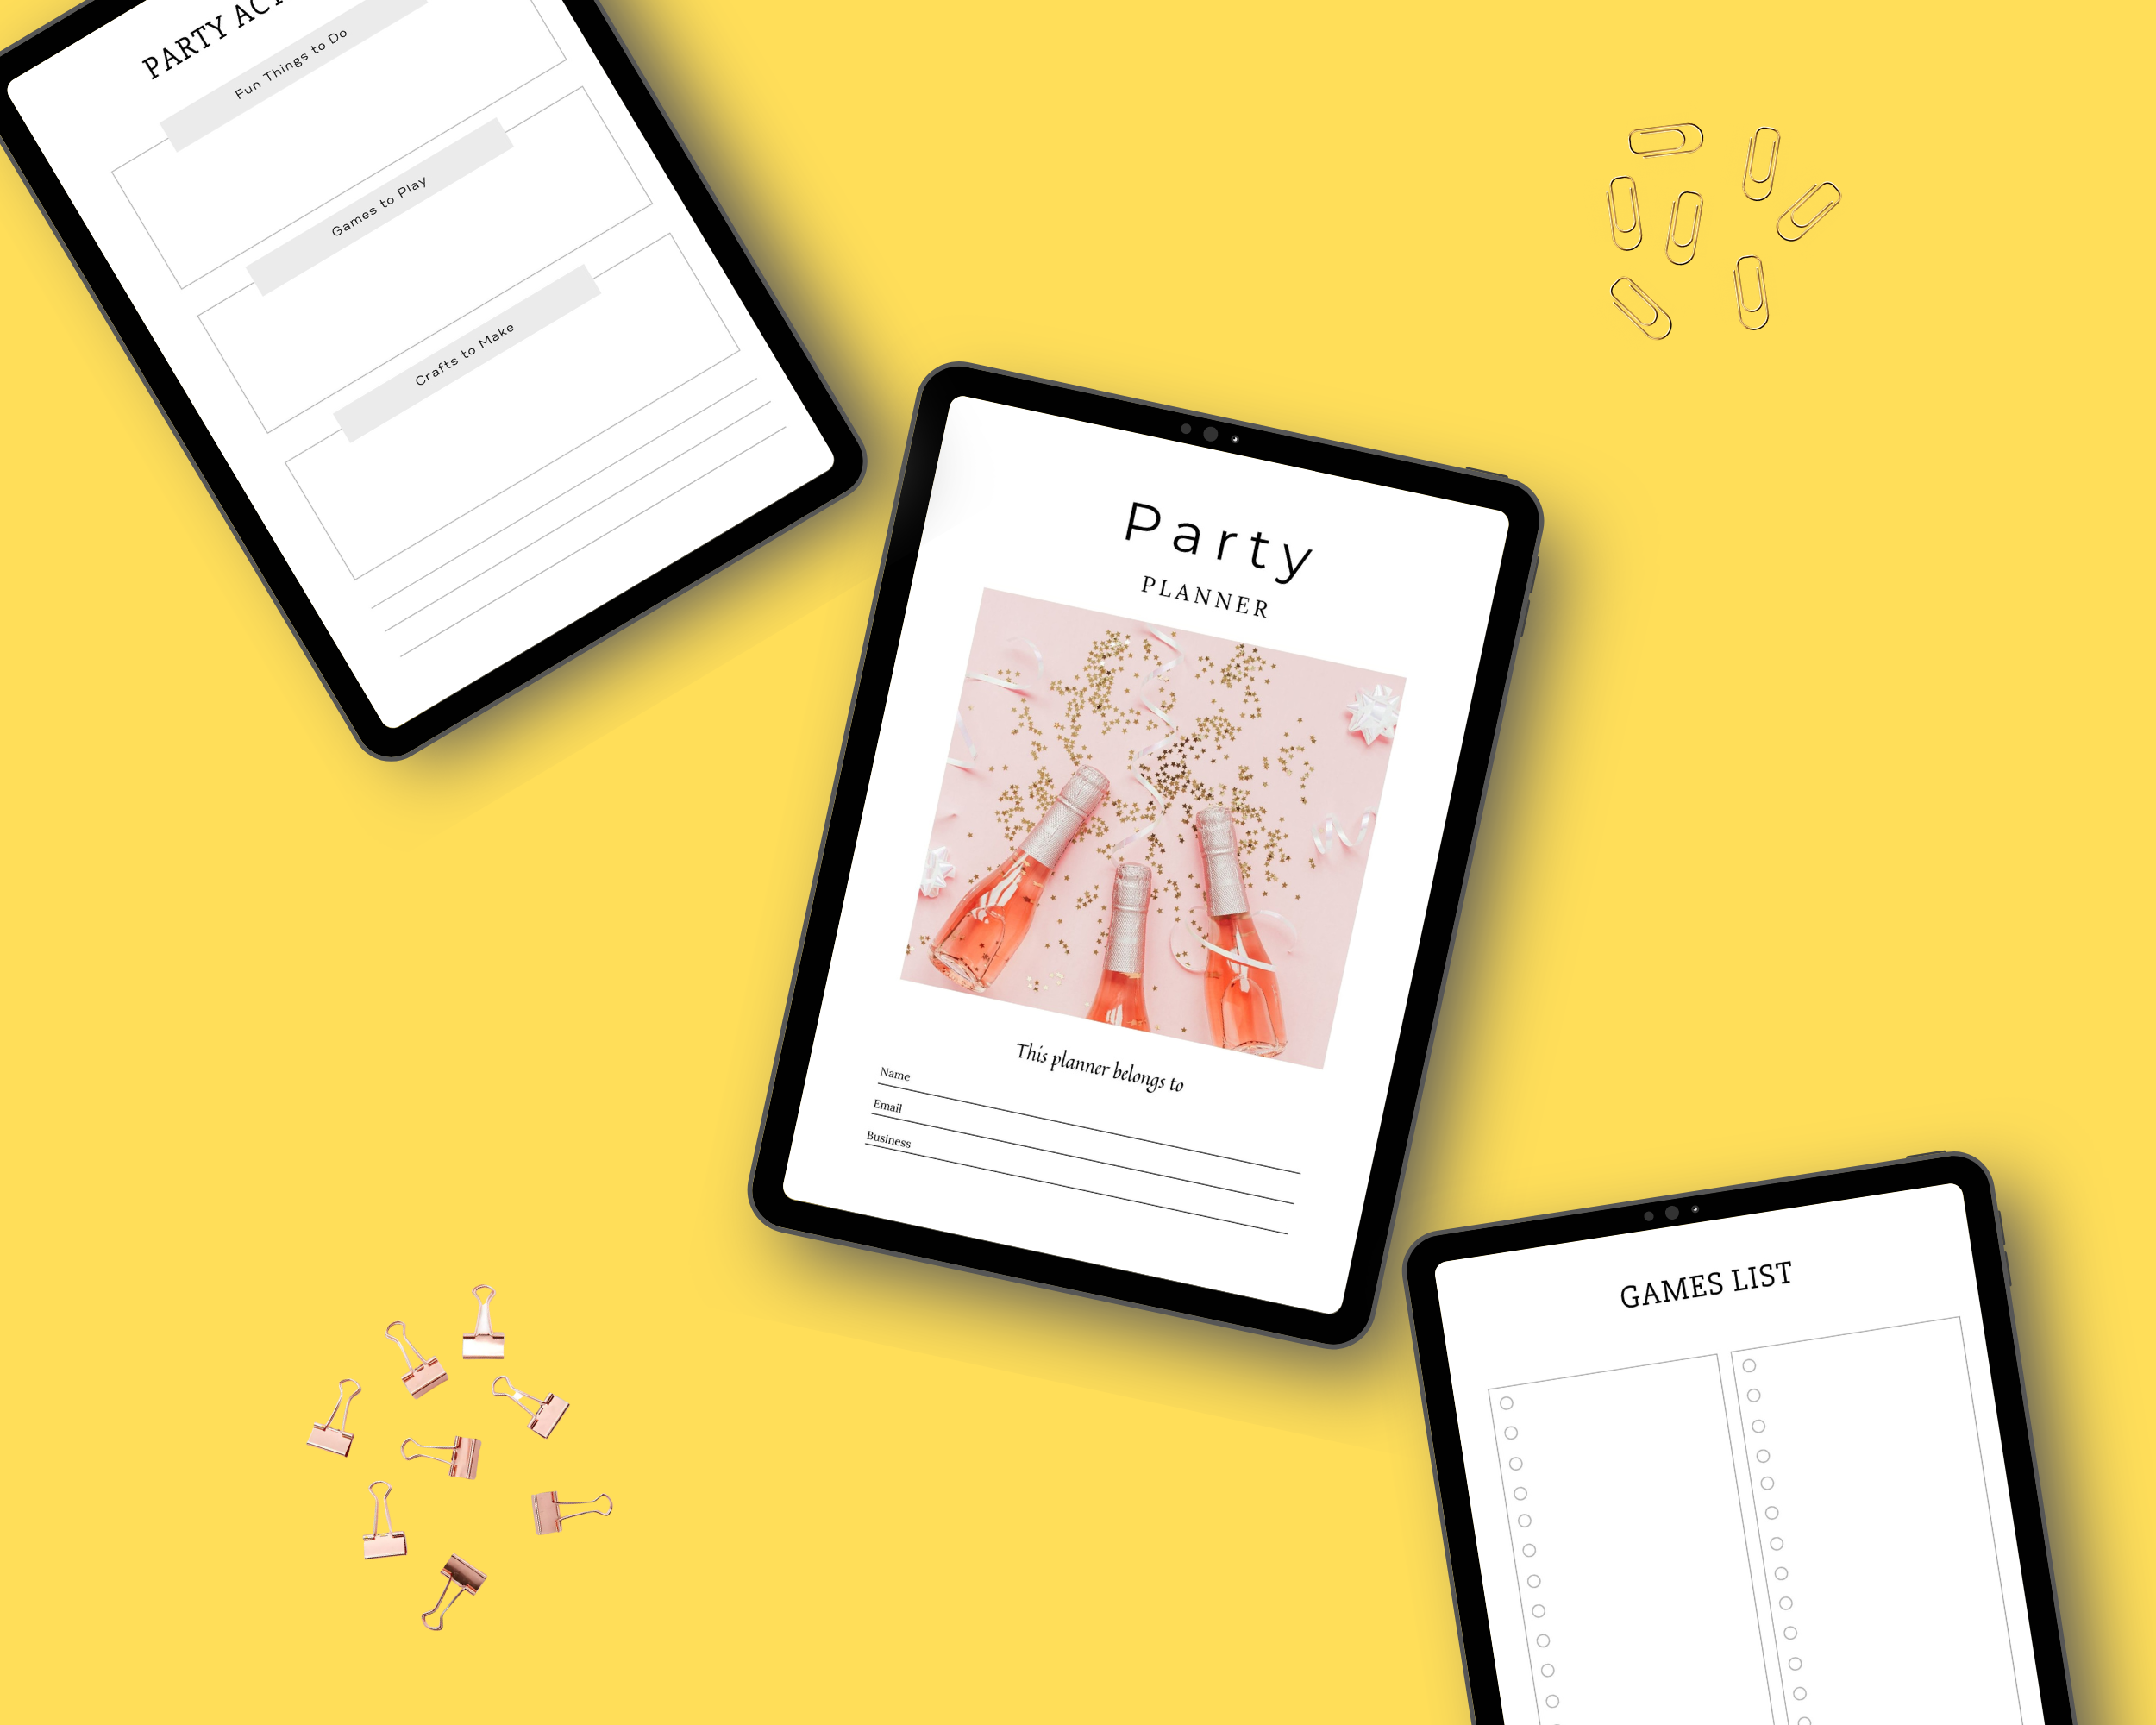 Editable Party Planner in Canva | Commercial Use